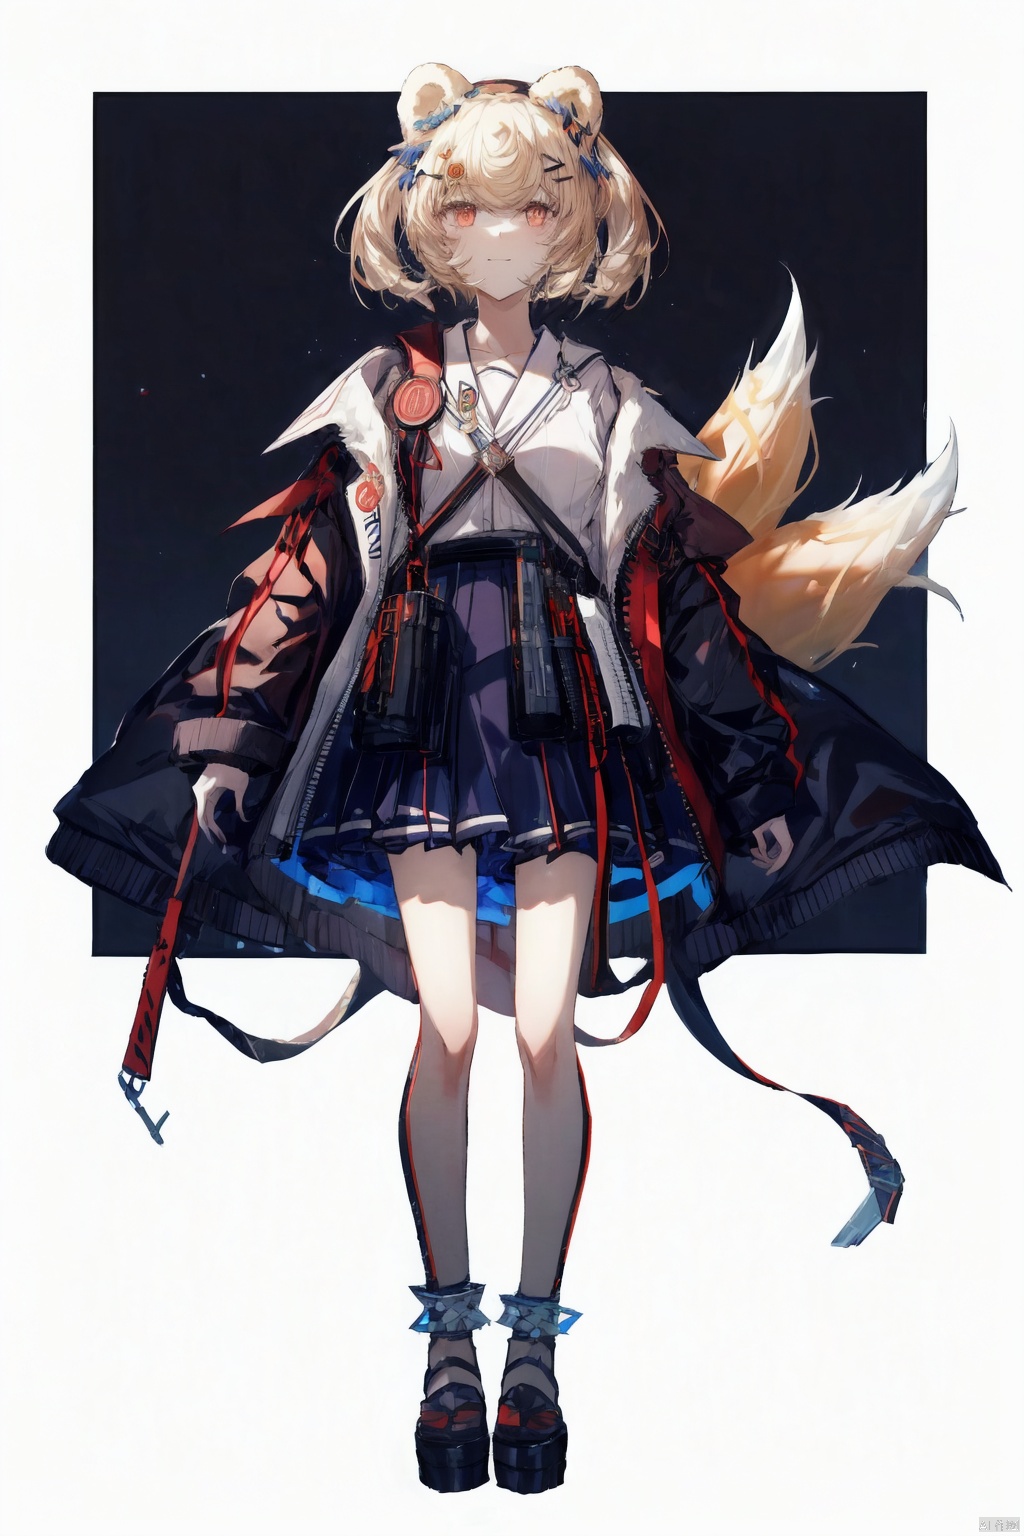 Clothing, animal, ear, plush, animal, ear, anklets, hair, shirt, brown sweater, sweater, closed, mouth, colorful, ear, girl, background, skirt, high-rise, kitsune, kyuubi, multi-color, hair, shirt, simple, background, skirt, smile, zuran, (anklets), hair, ((poakl)),, detailed, blue_poison_(arknights), gummy_(arknights)